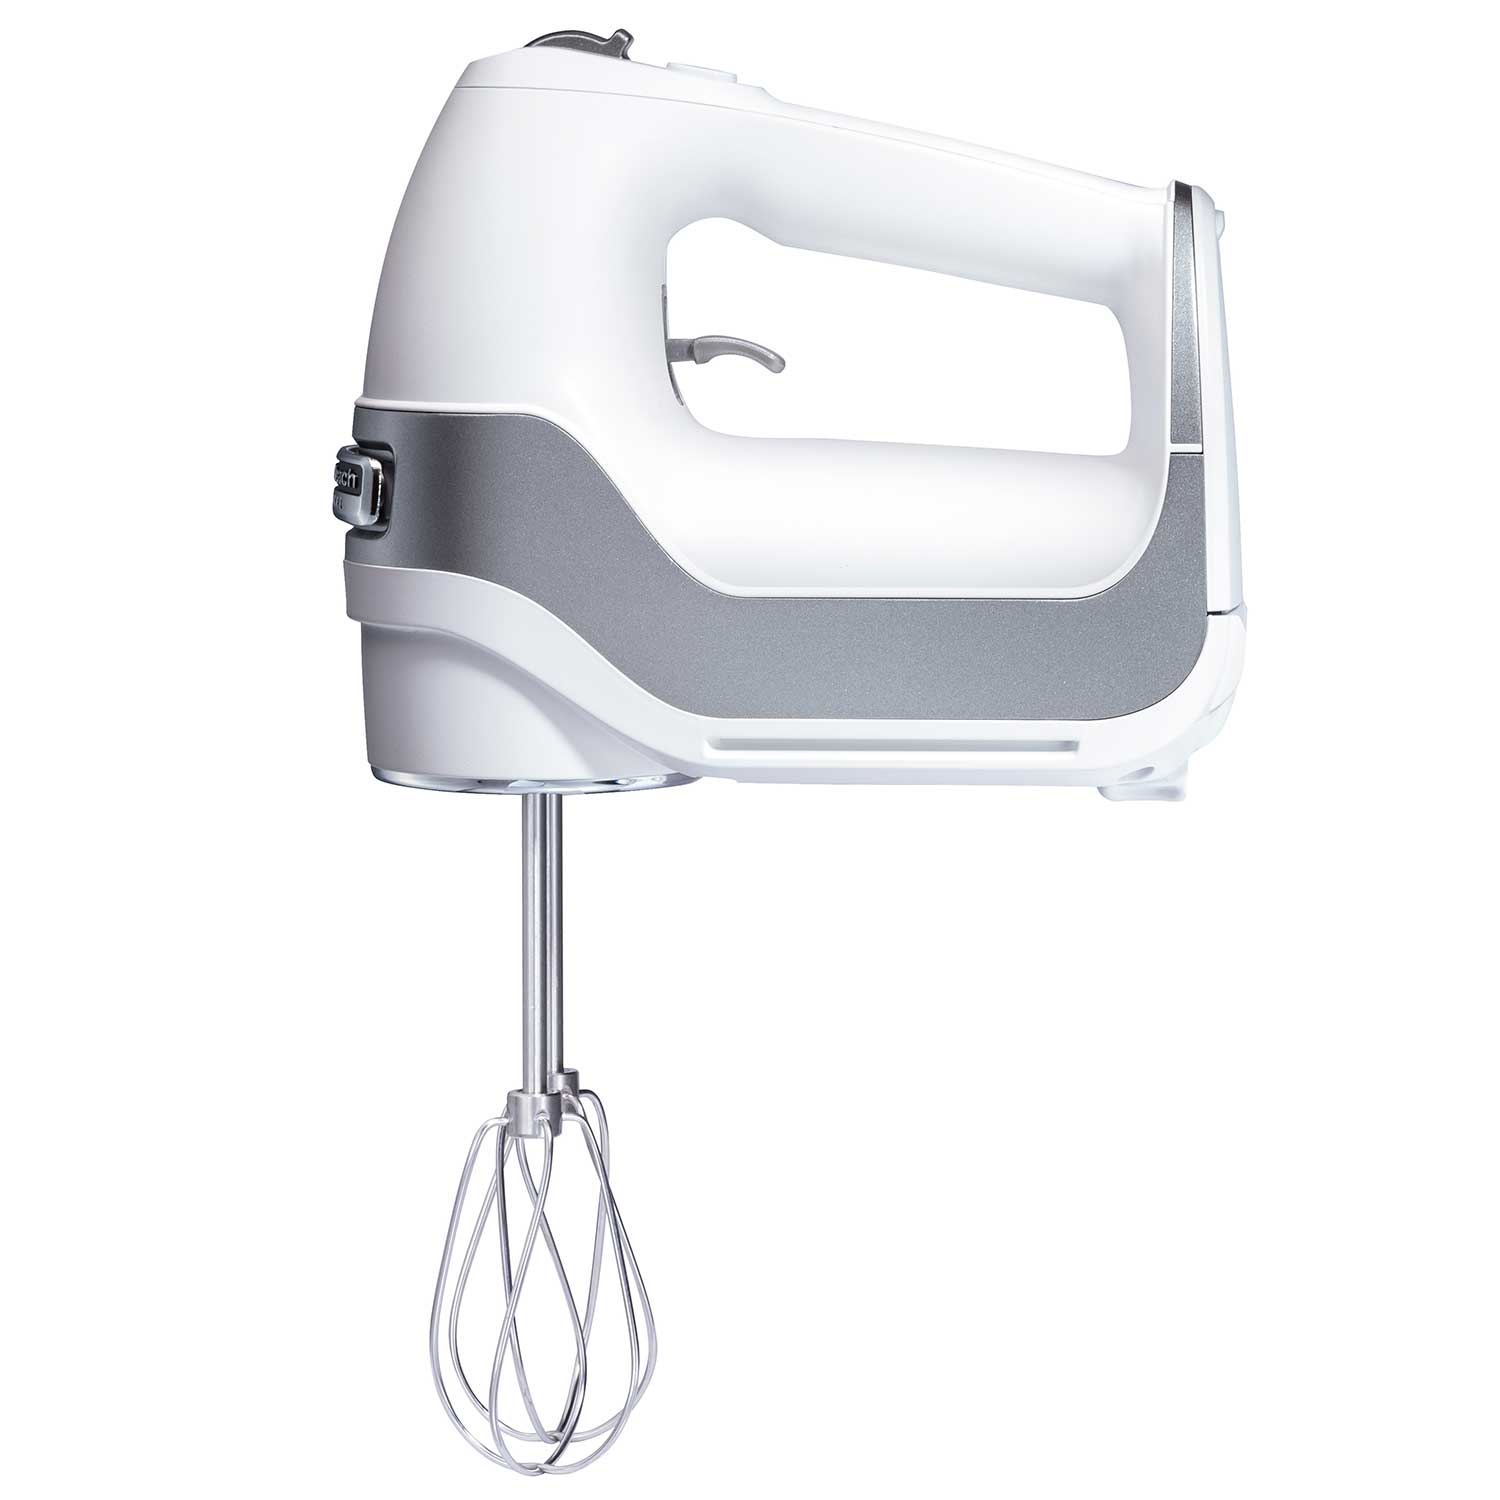 Hamilton Beach Professional 5-Speed White Hand Mixer with Stainless Steel Attachments and Snap-On Storage Case